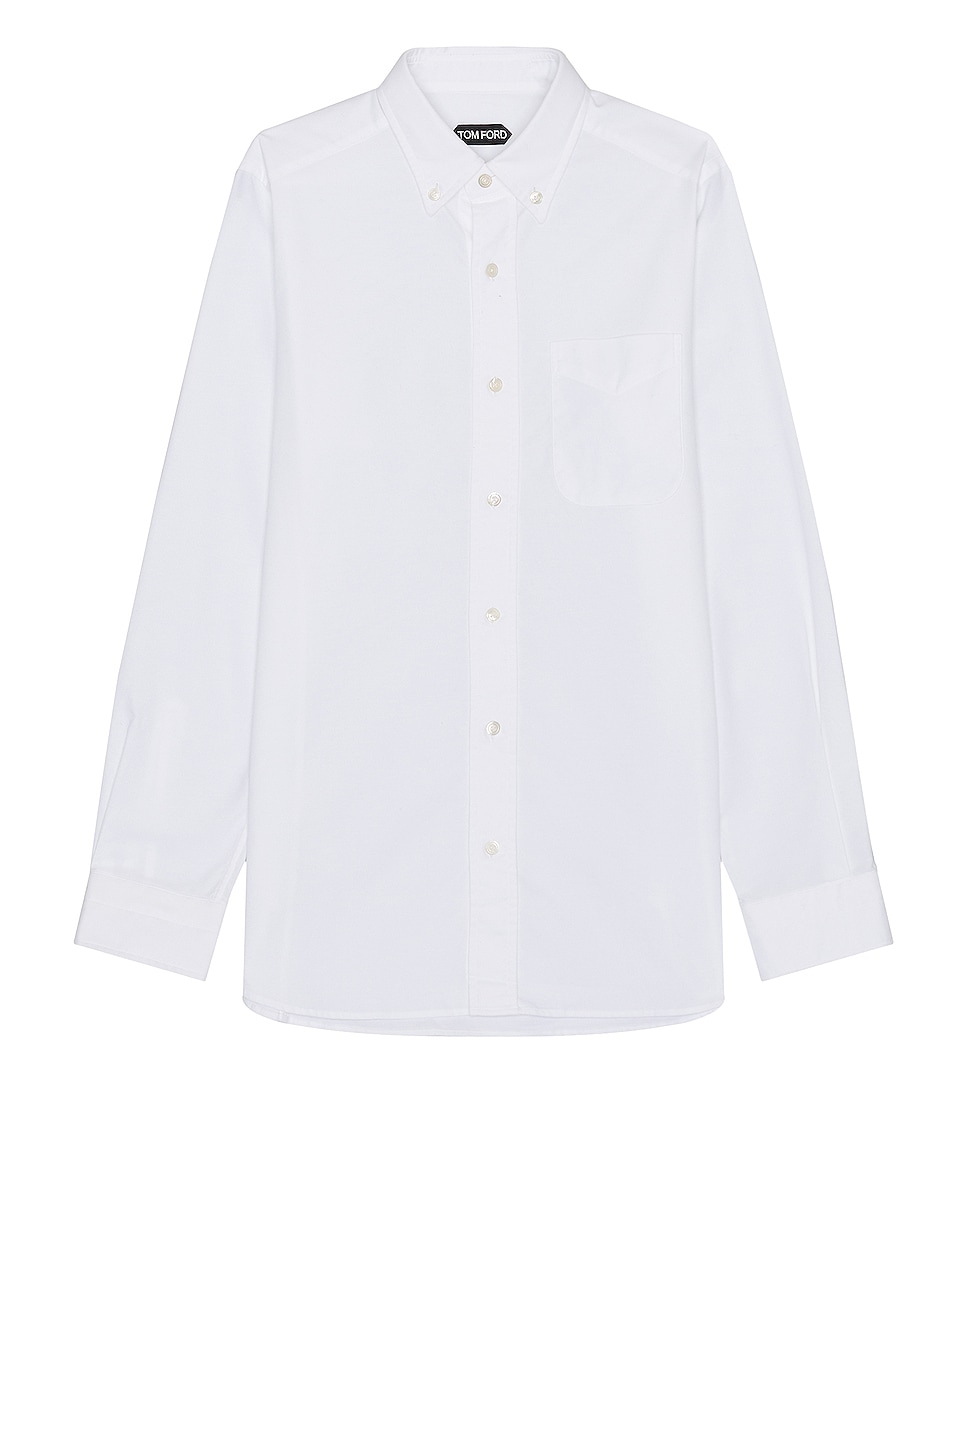 Image 1 of TOM FORD Washed Stretch Oxford Slim Fit Leisure Shirt in White